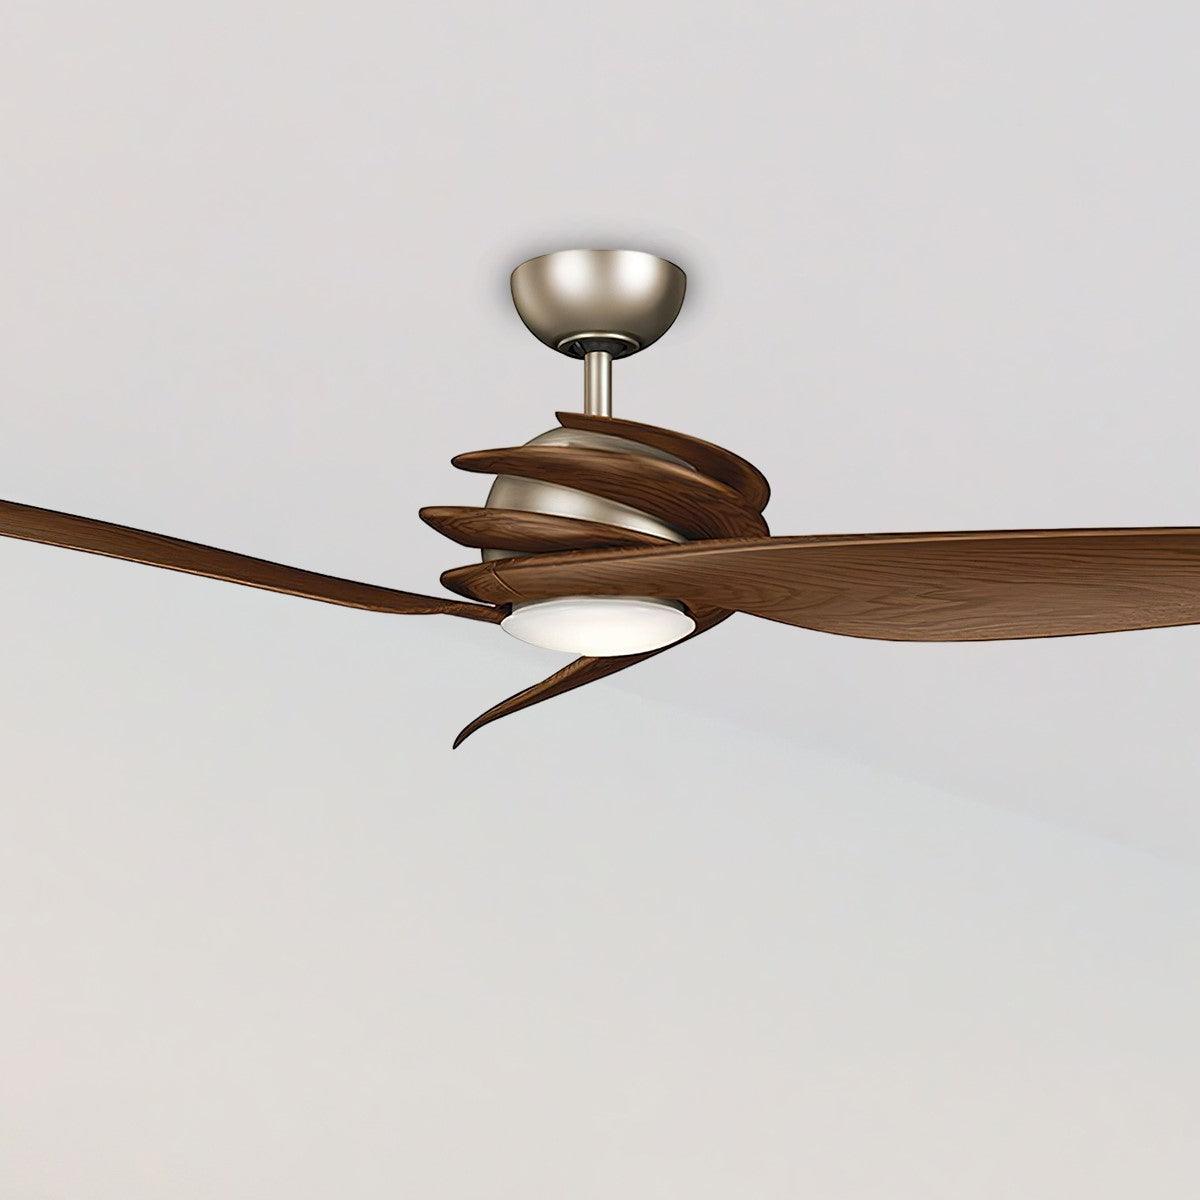 Spyra 62 Inch Modern Propeller Ceiling Fan With Light, Wall Control Included - Bees Lighting